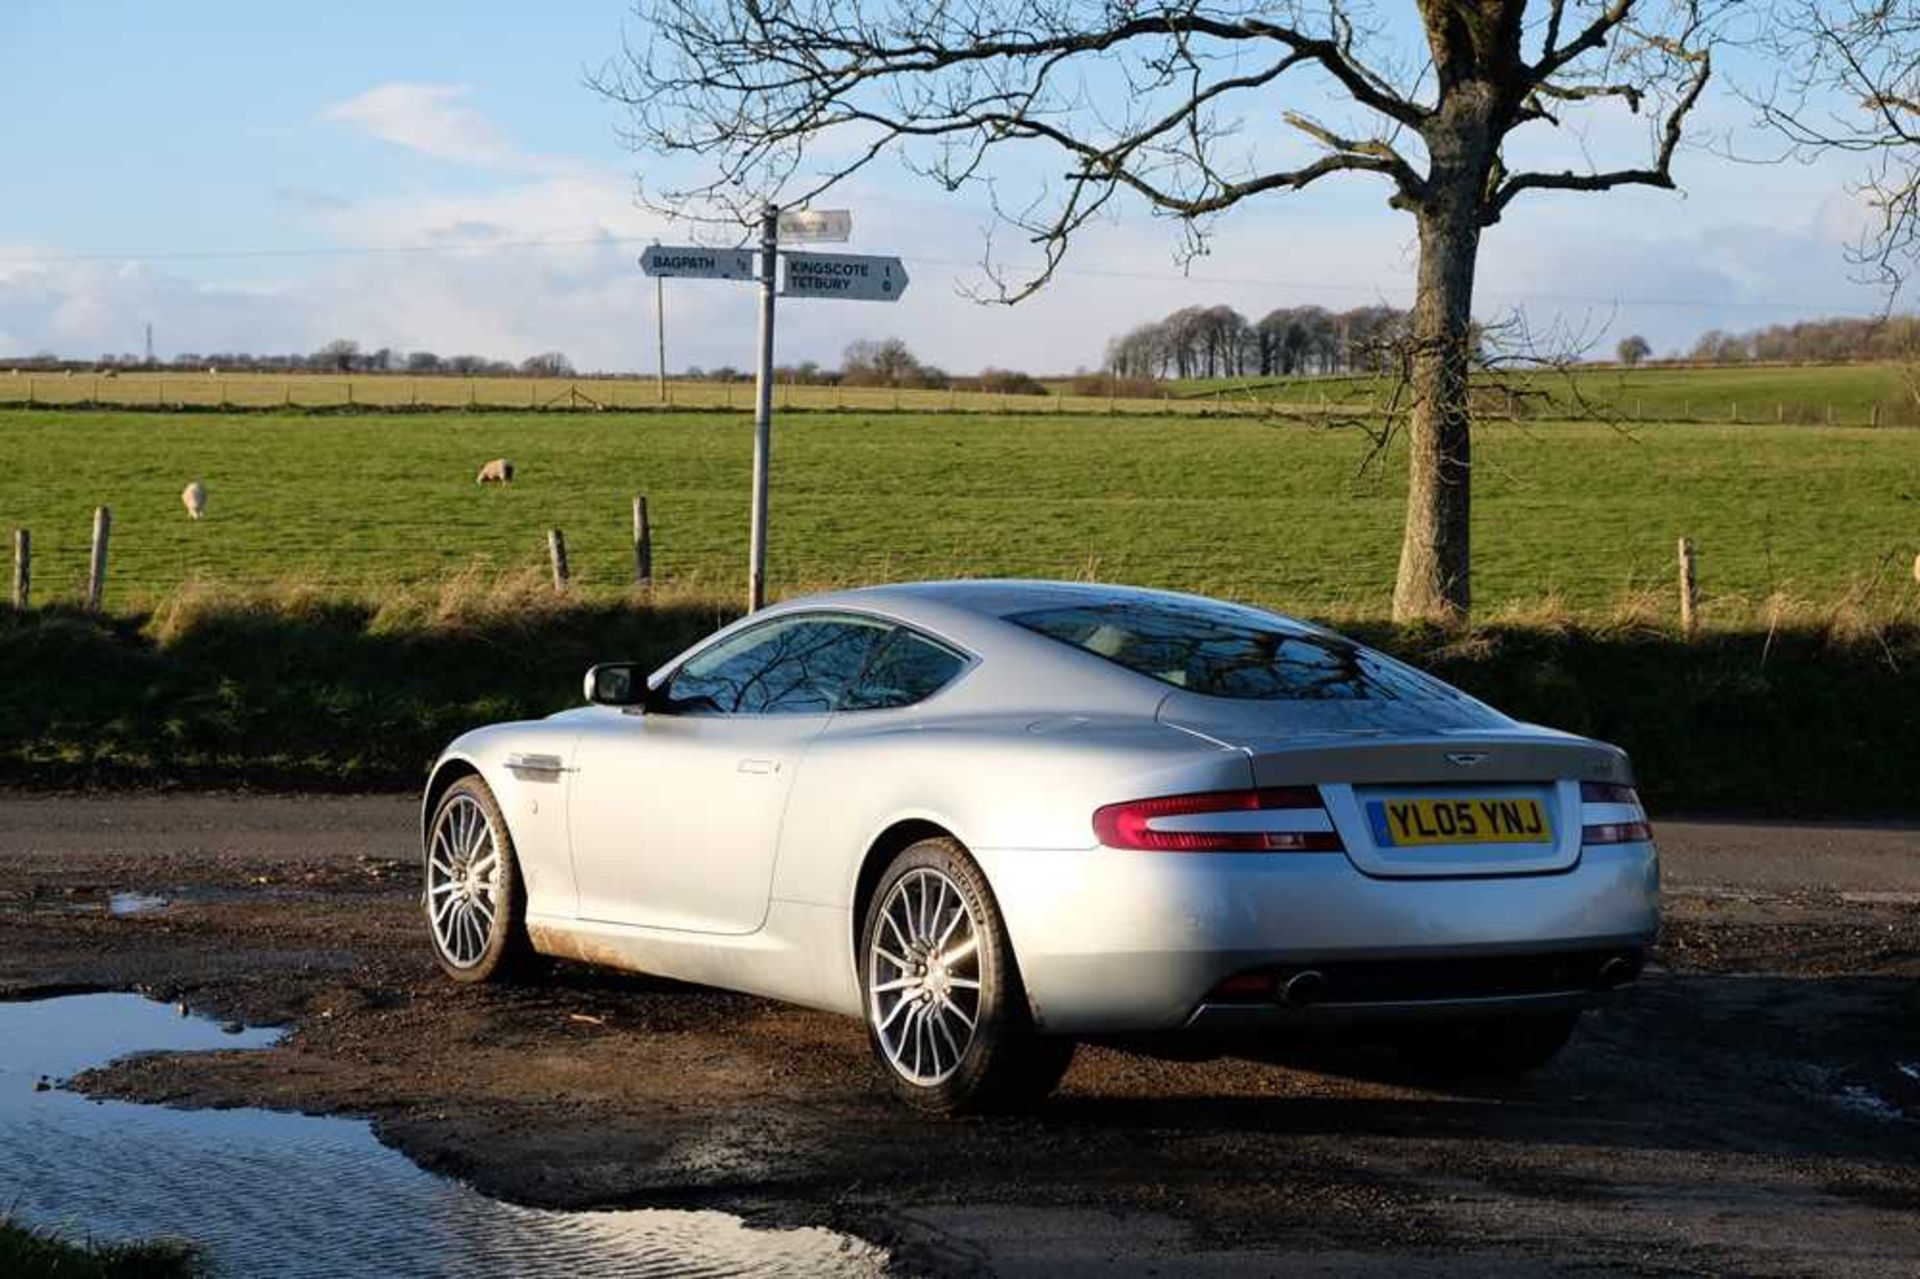 2005 Aston Martin DB9 c.25,000 from new and 4 former keepers - Image 21 of 59